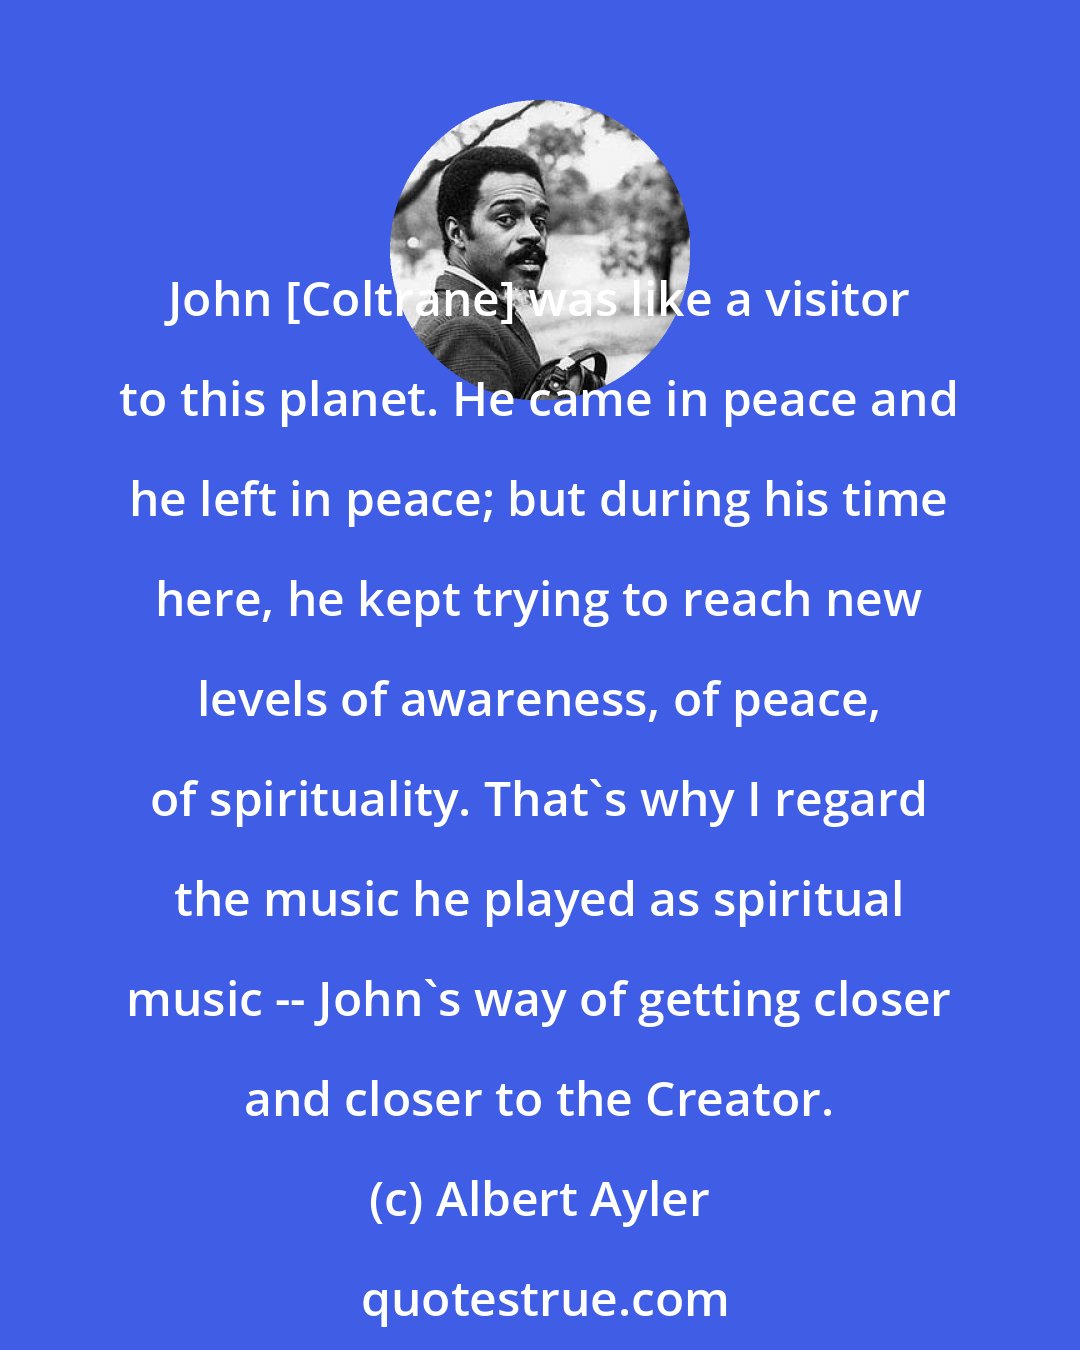 Albert Ayler: John [Coltrane] was like a visitor to this planet. He came in peace and he left in peace; but during his time here, he kept trying to reach new levels of awareness, of peace, of spirituality. That's why I regard the music he played as spiritual music -- John's way of getting closer and closer to the Creator.